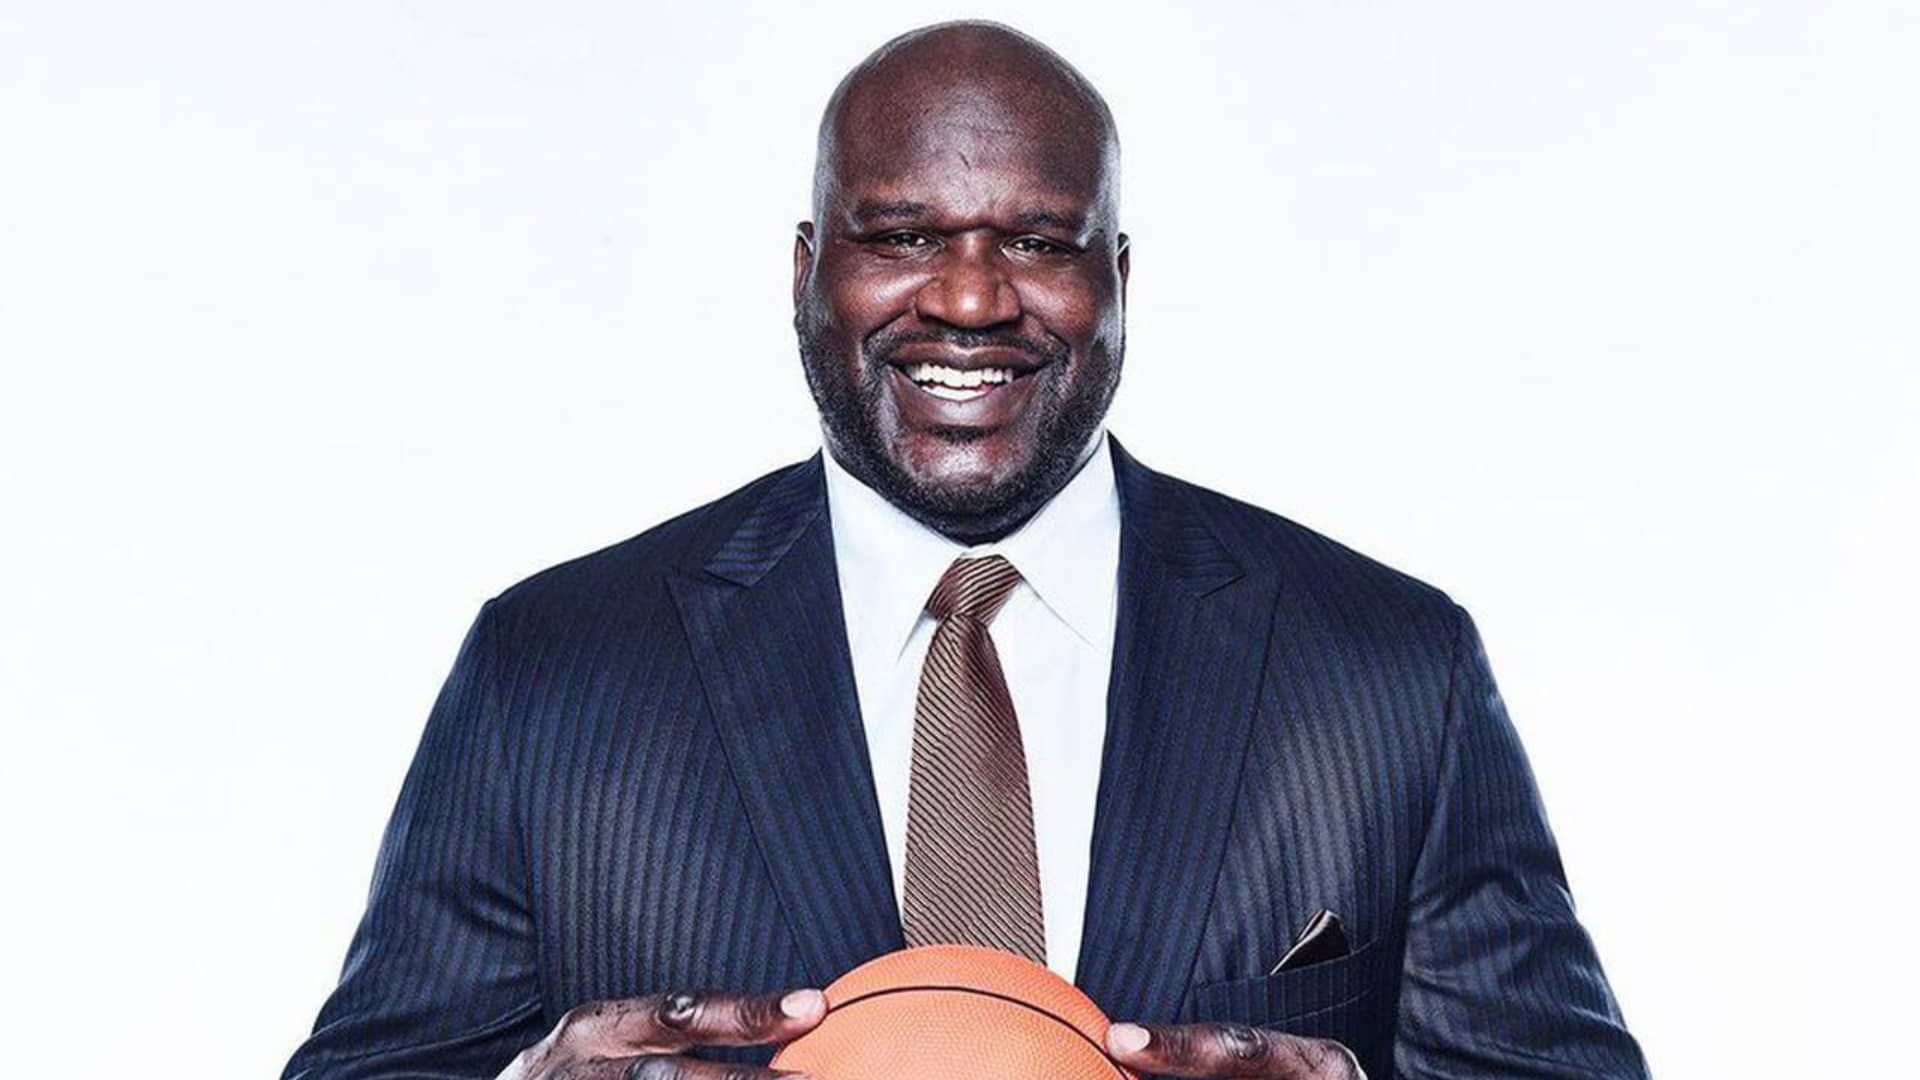 Shaquille Oneal- strongest NBA player ever